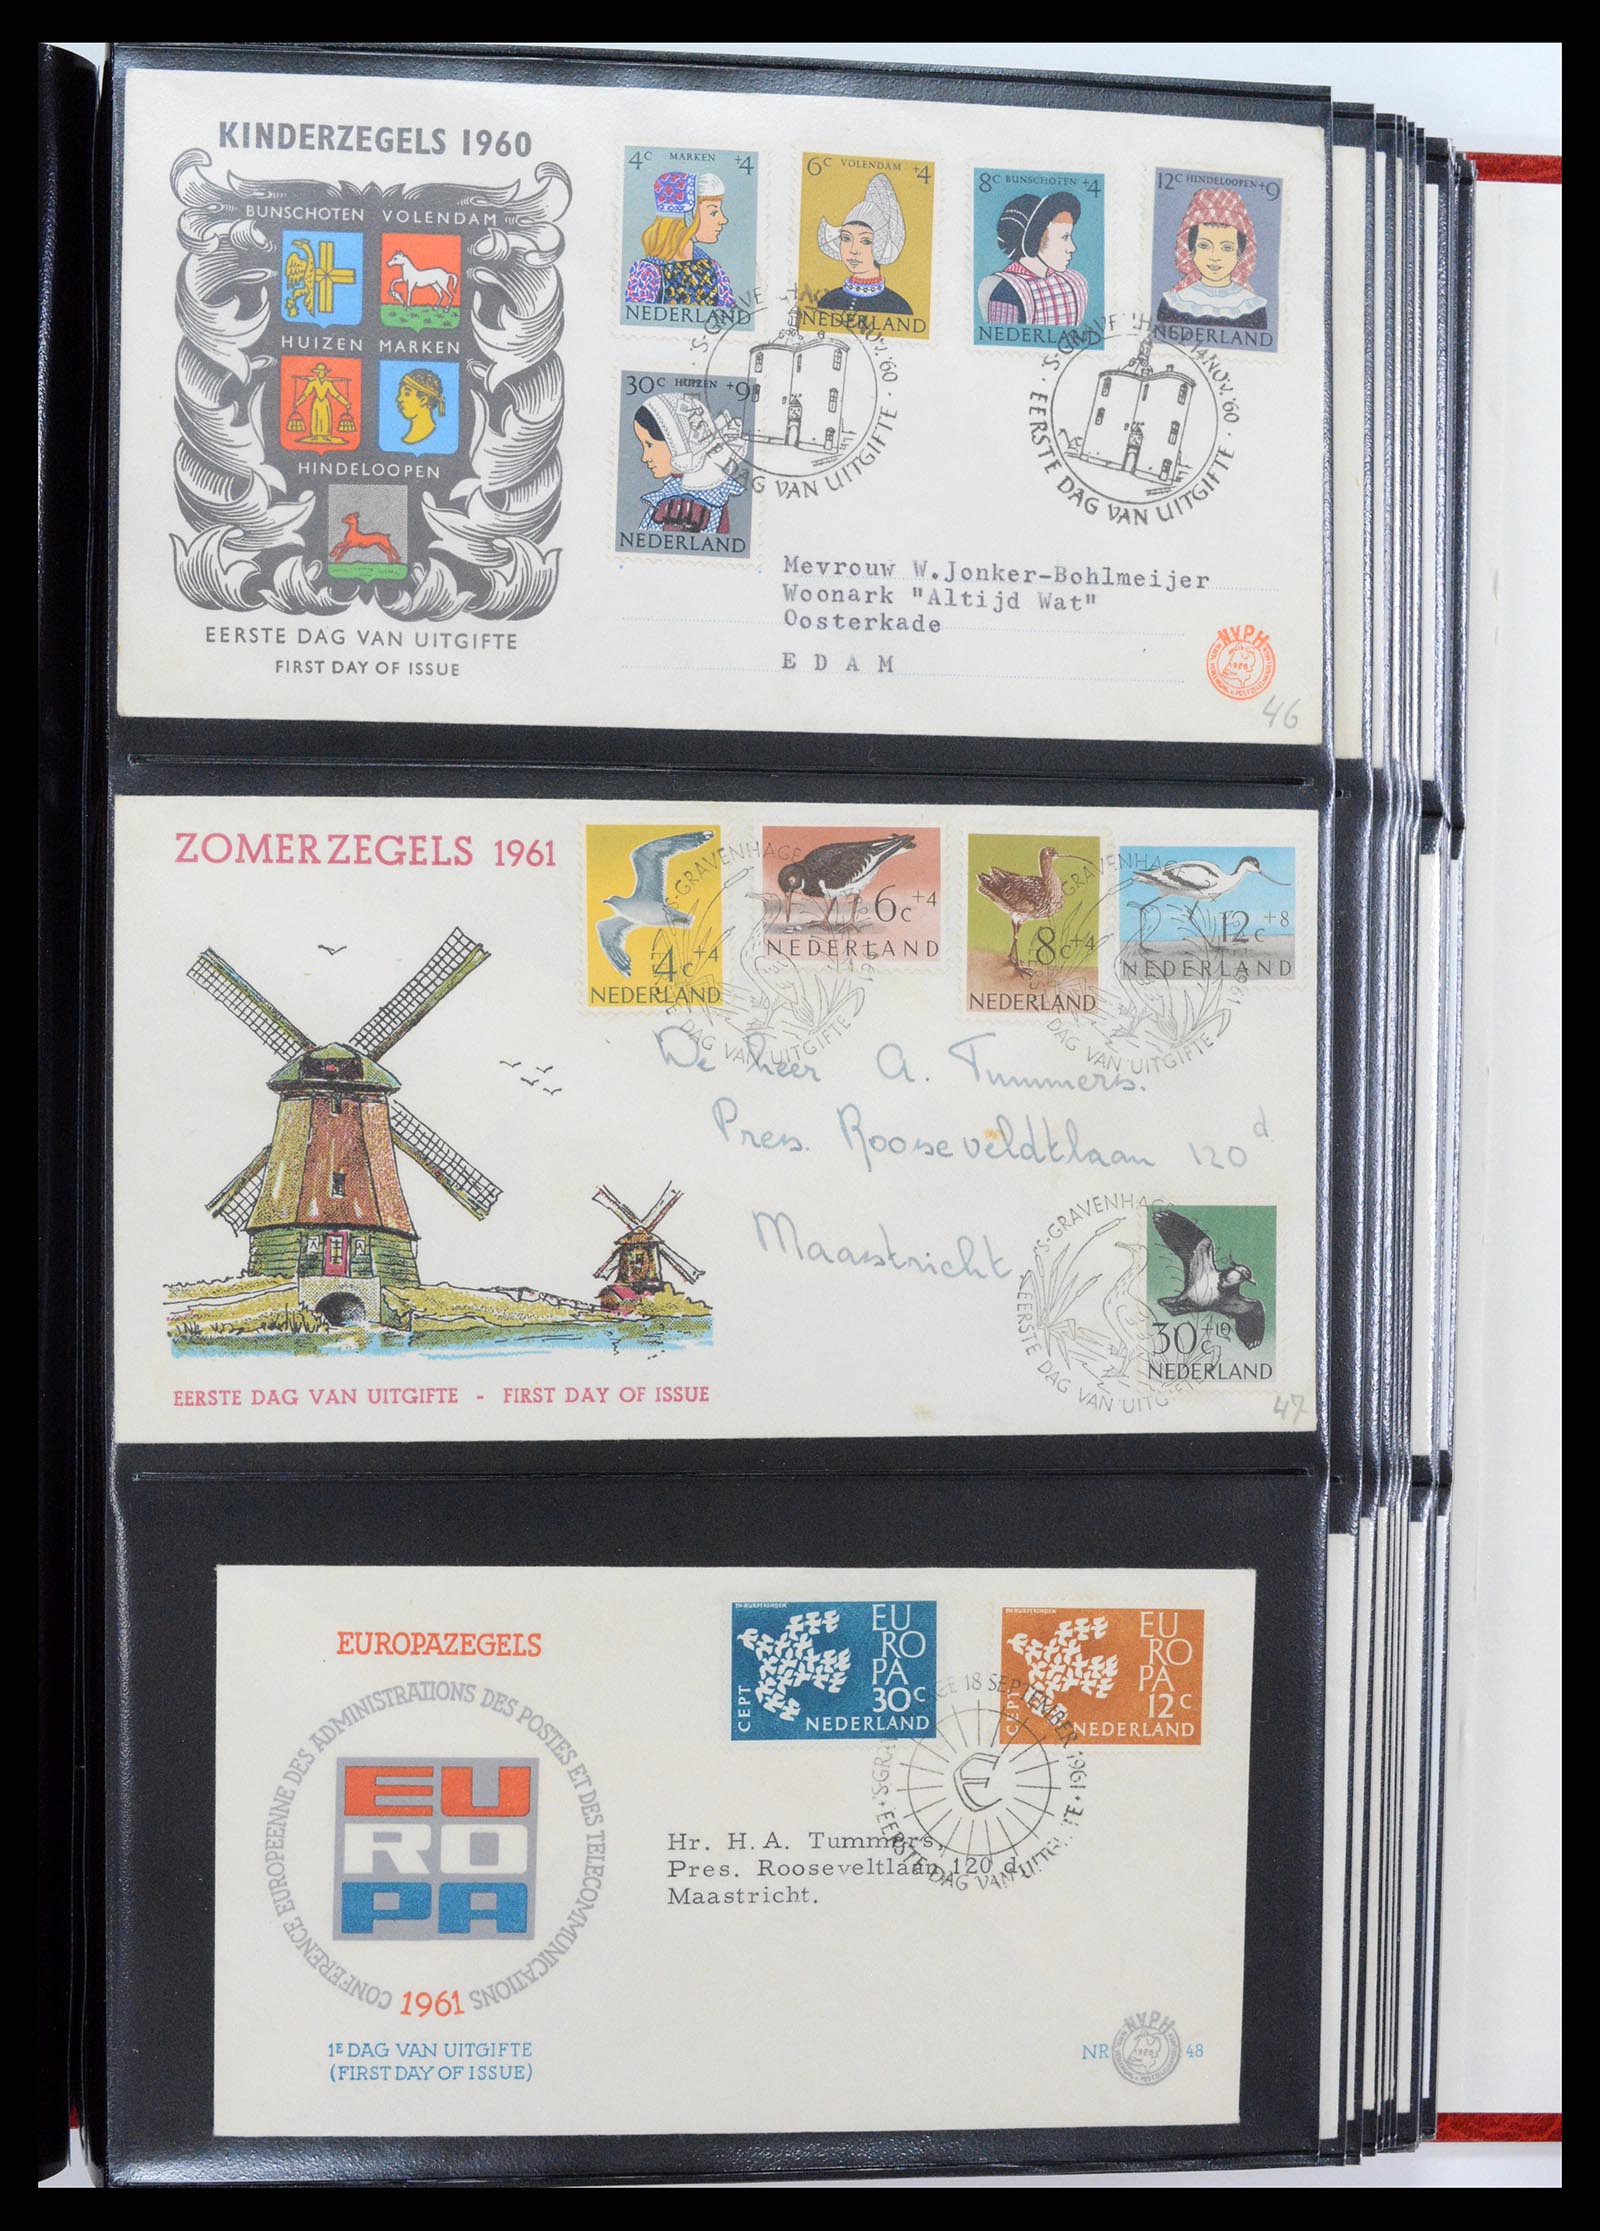 37484 018 - Stamp collection 37484 Netherlands FDC's 1950-1976.